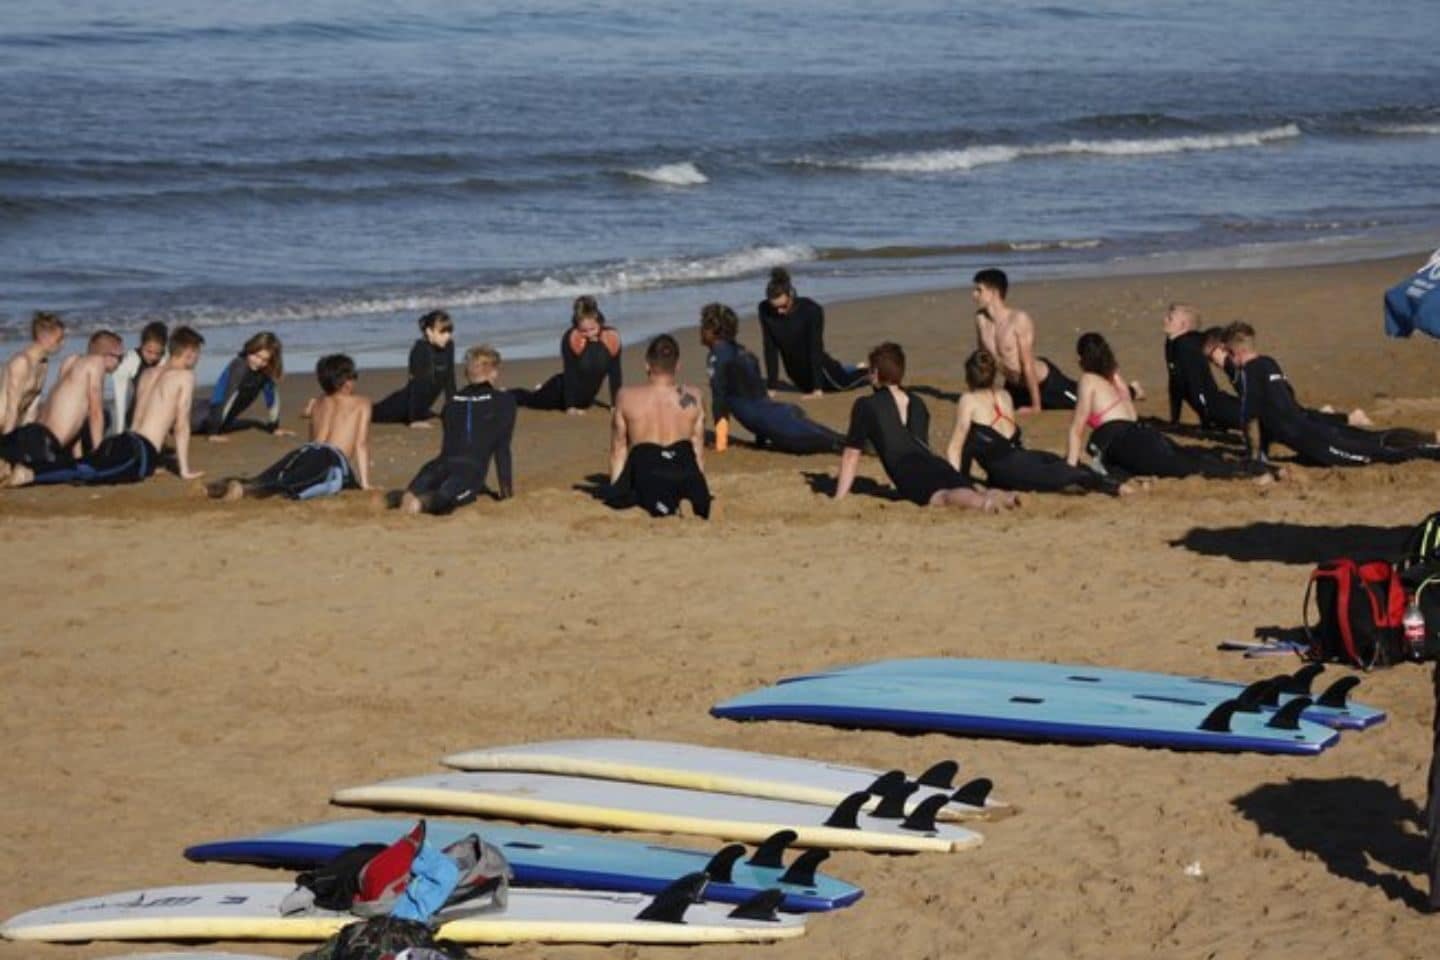 Group of surfers in black wet suits on the beach sand